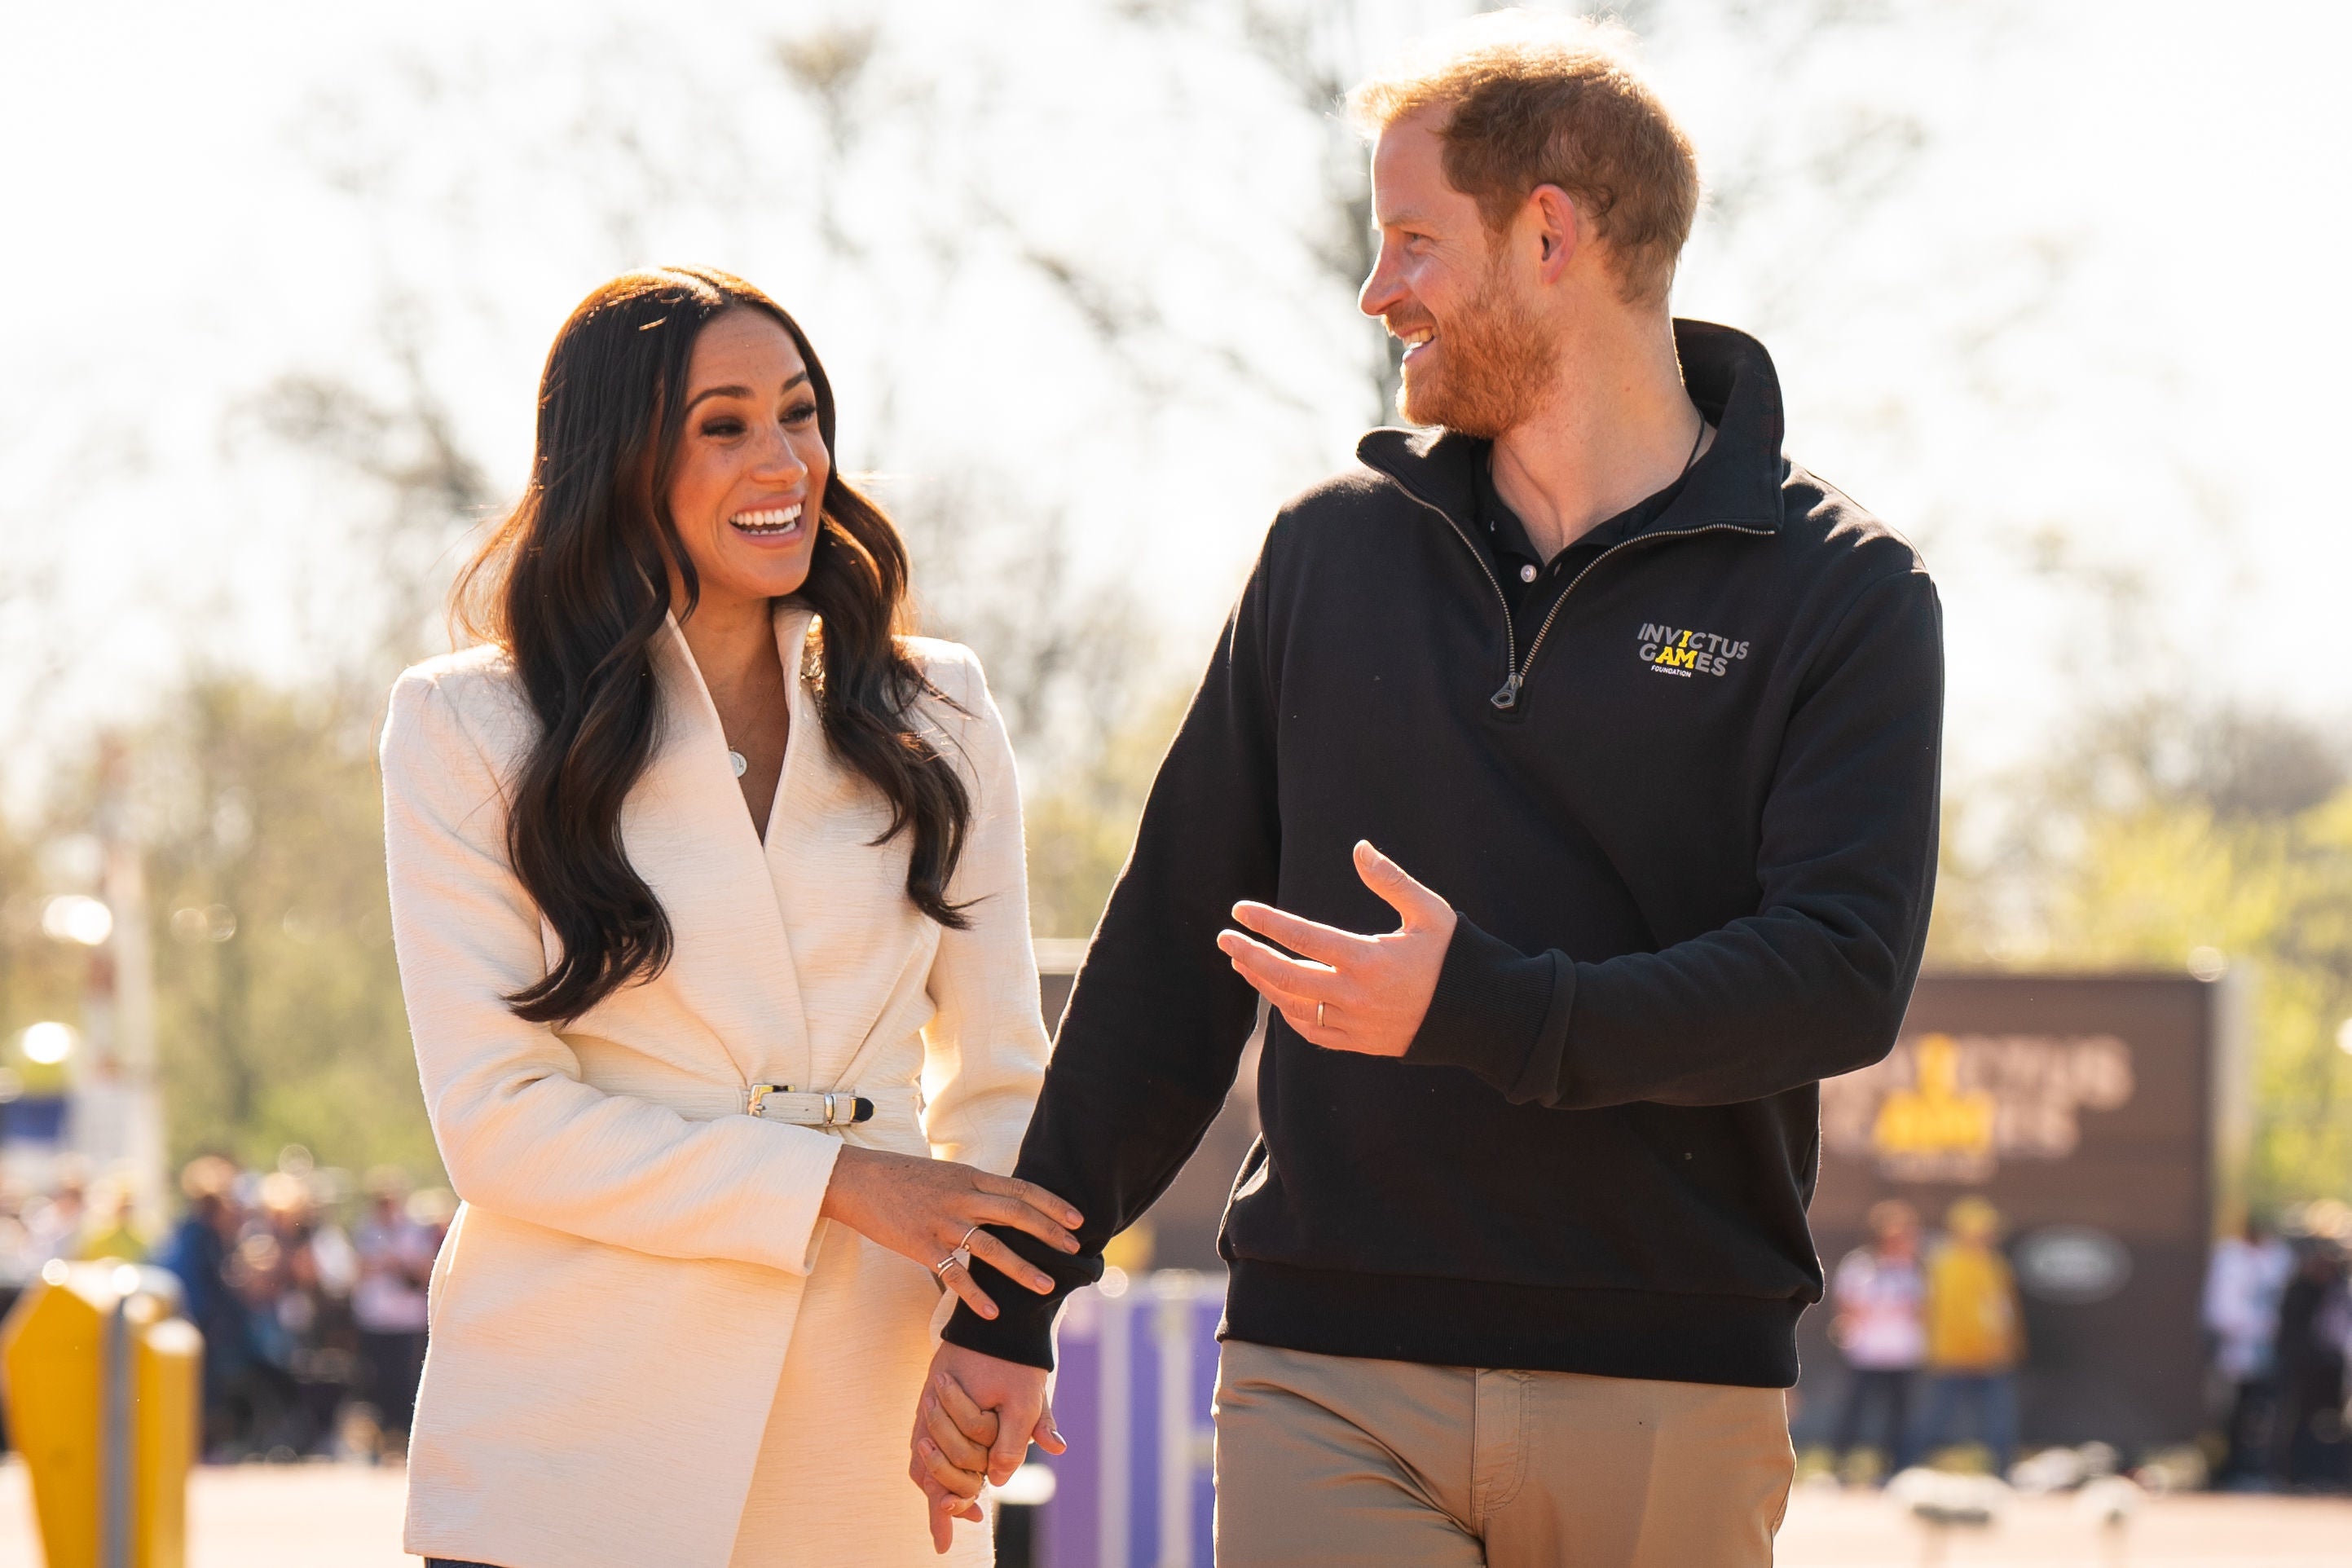 Harry and Meghan moved to California after stepping down as working royals in 2020.